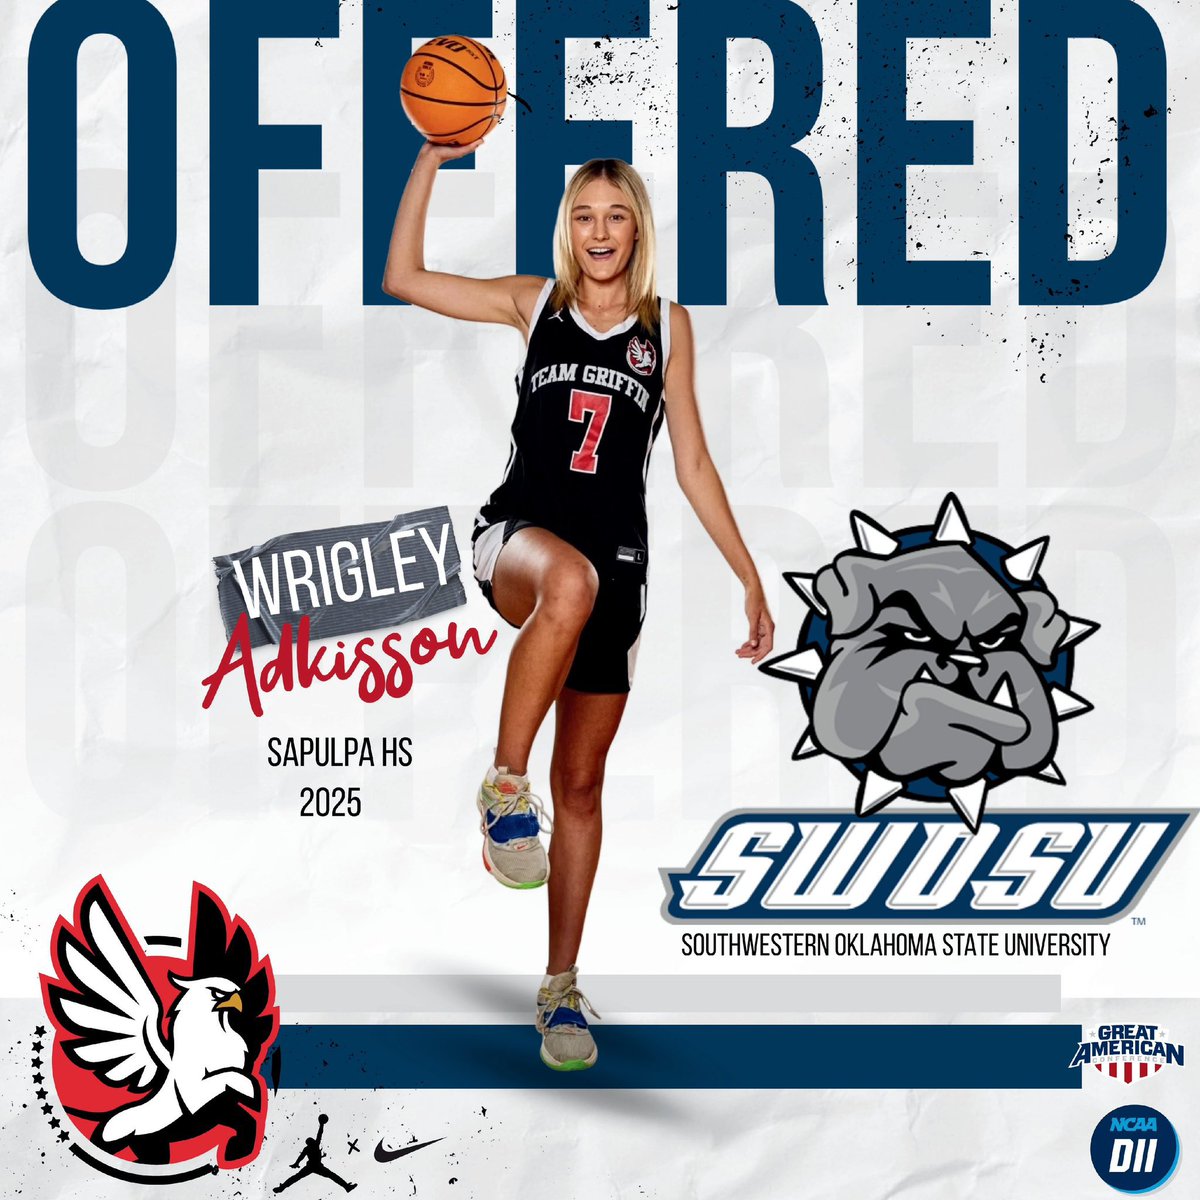 Thankful to receive an offer from @SWOSUW, thank you @CoachJeffZinn for believing in me! @okmagiccoach